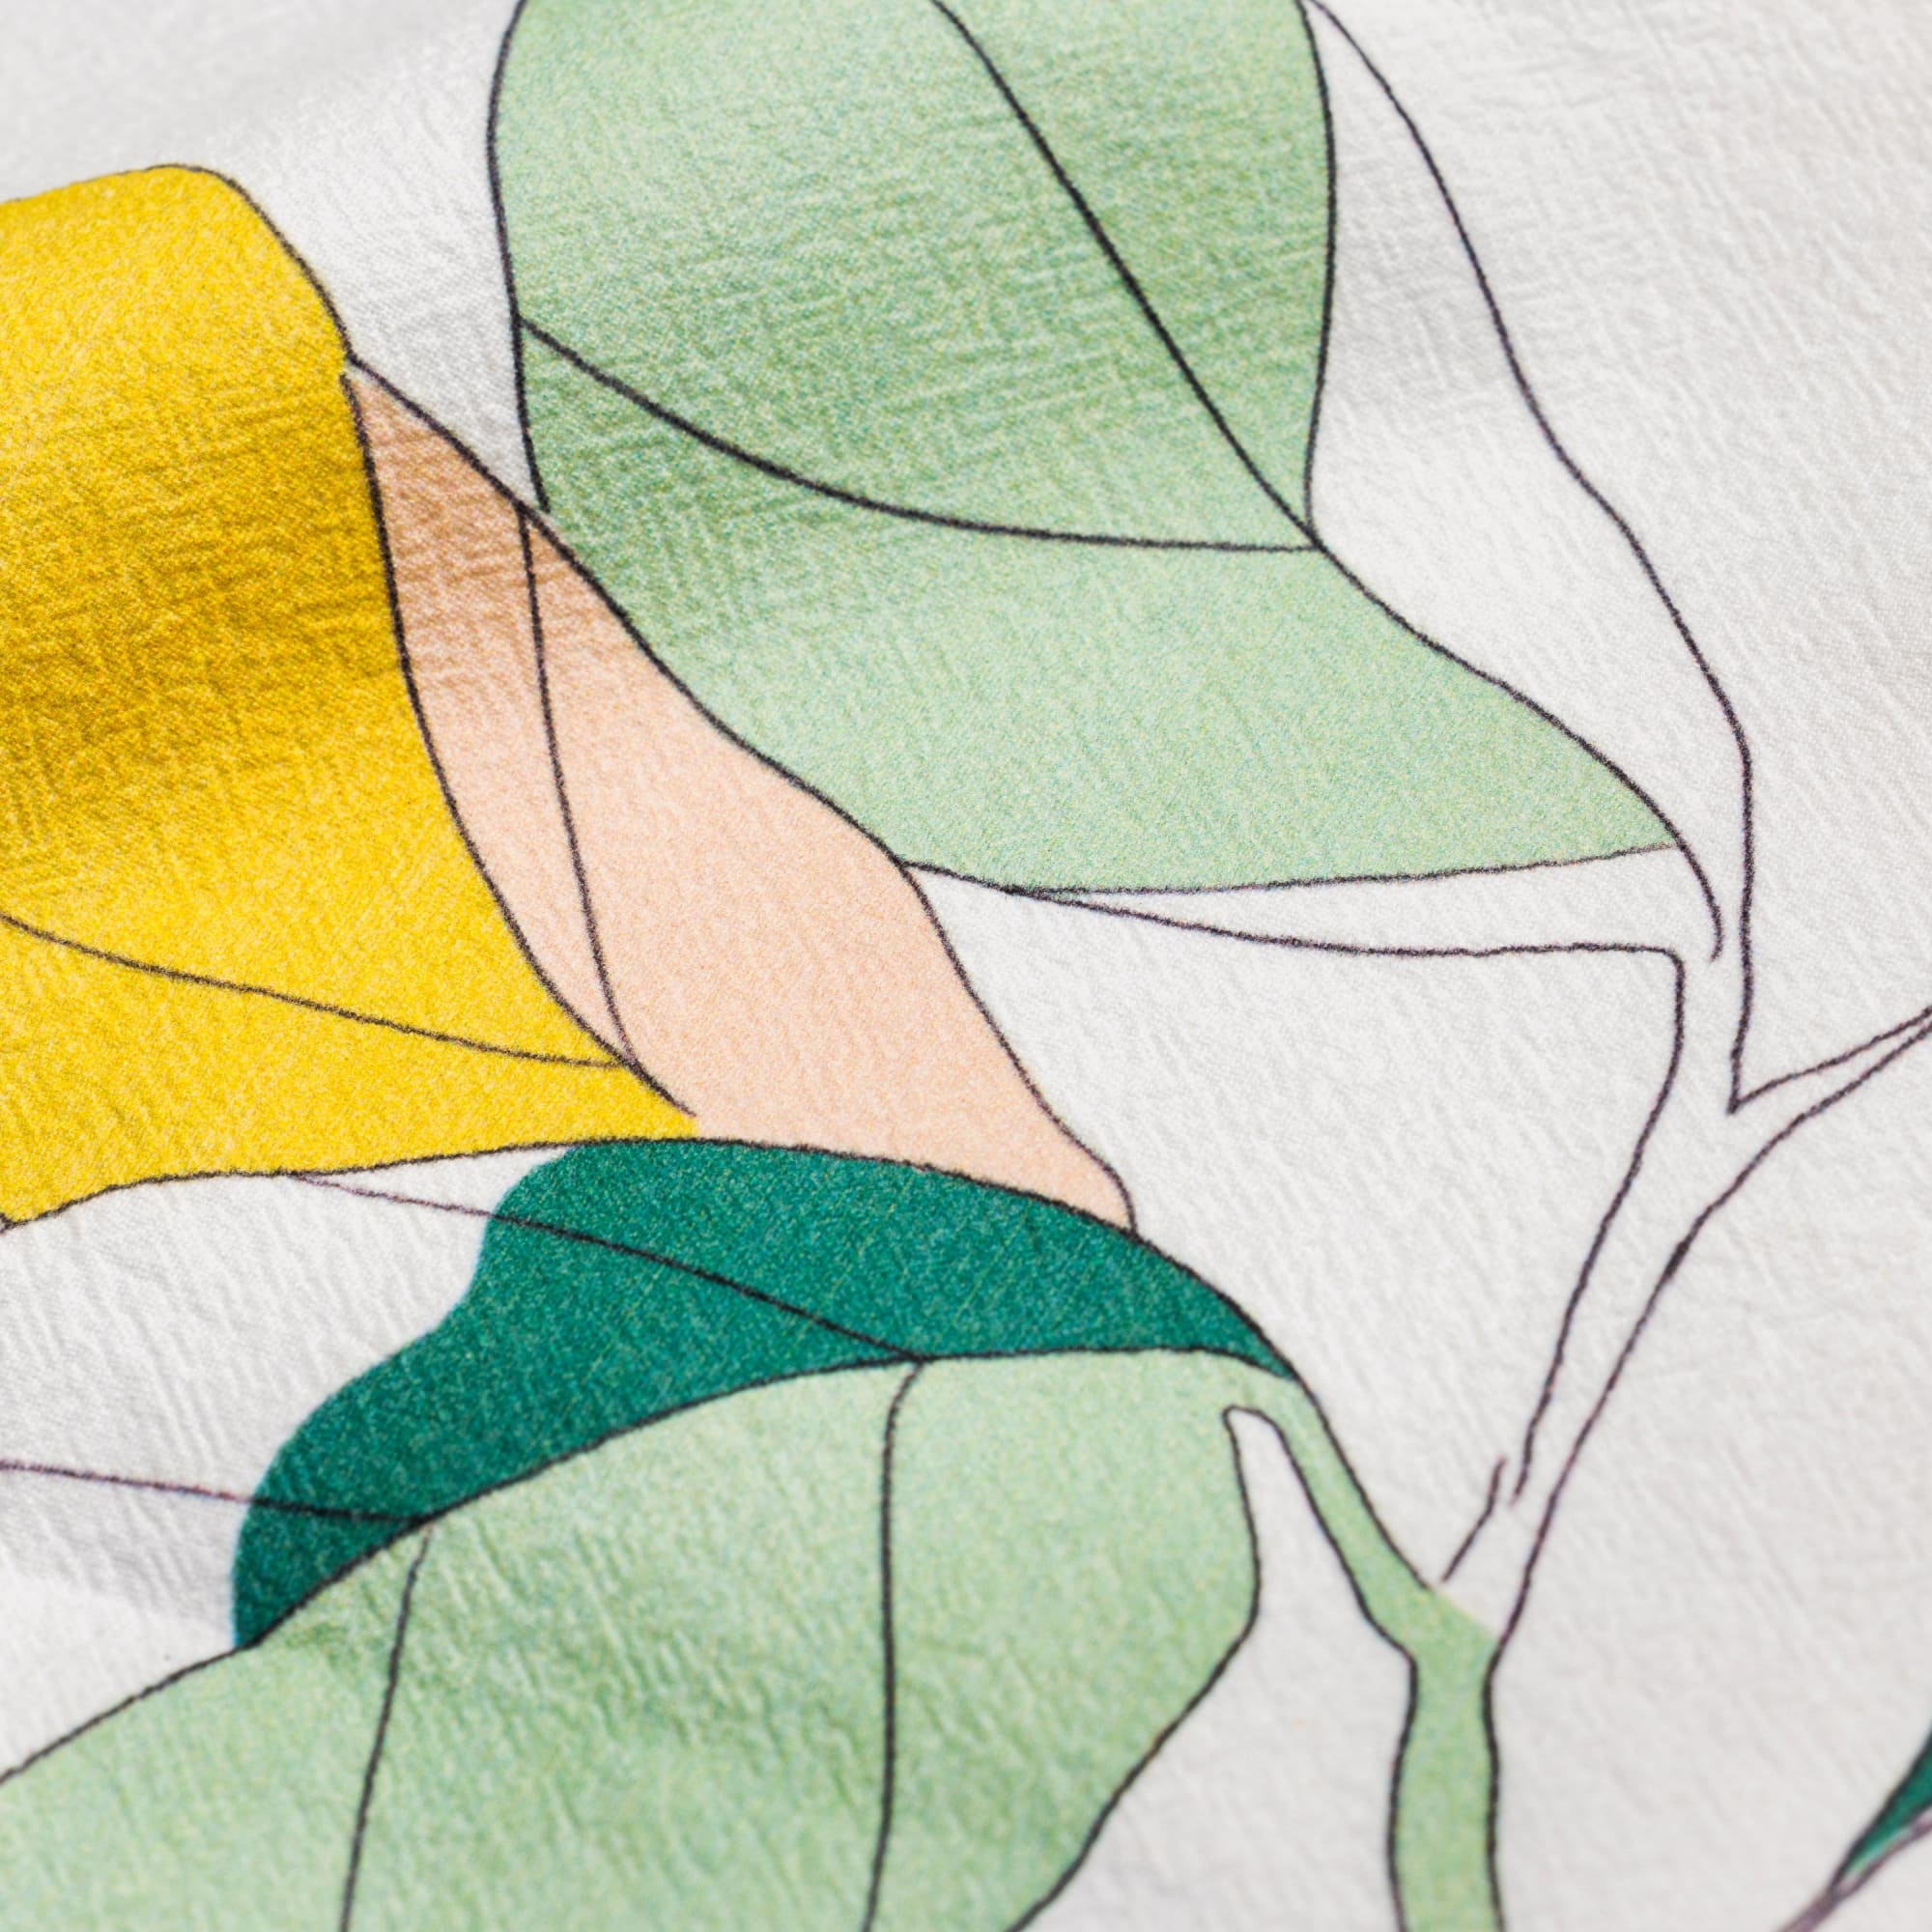 Detail of the design of one of the Herbal tea towels by the Baltic Club